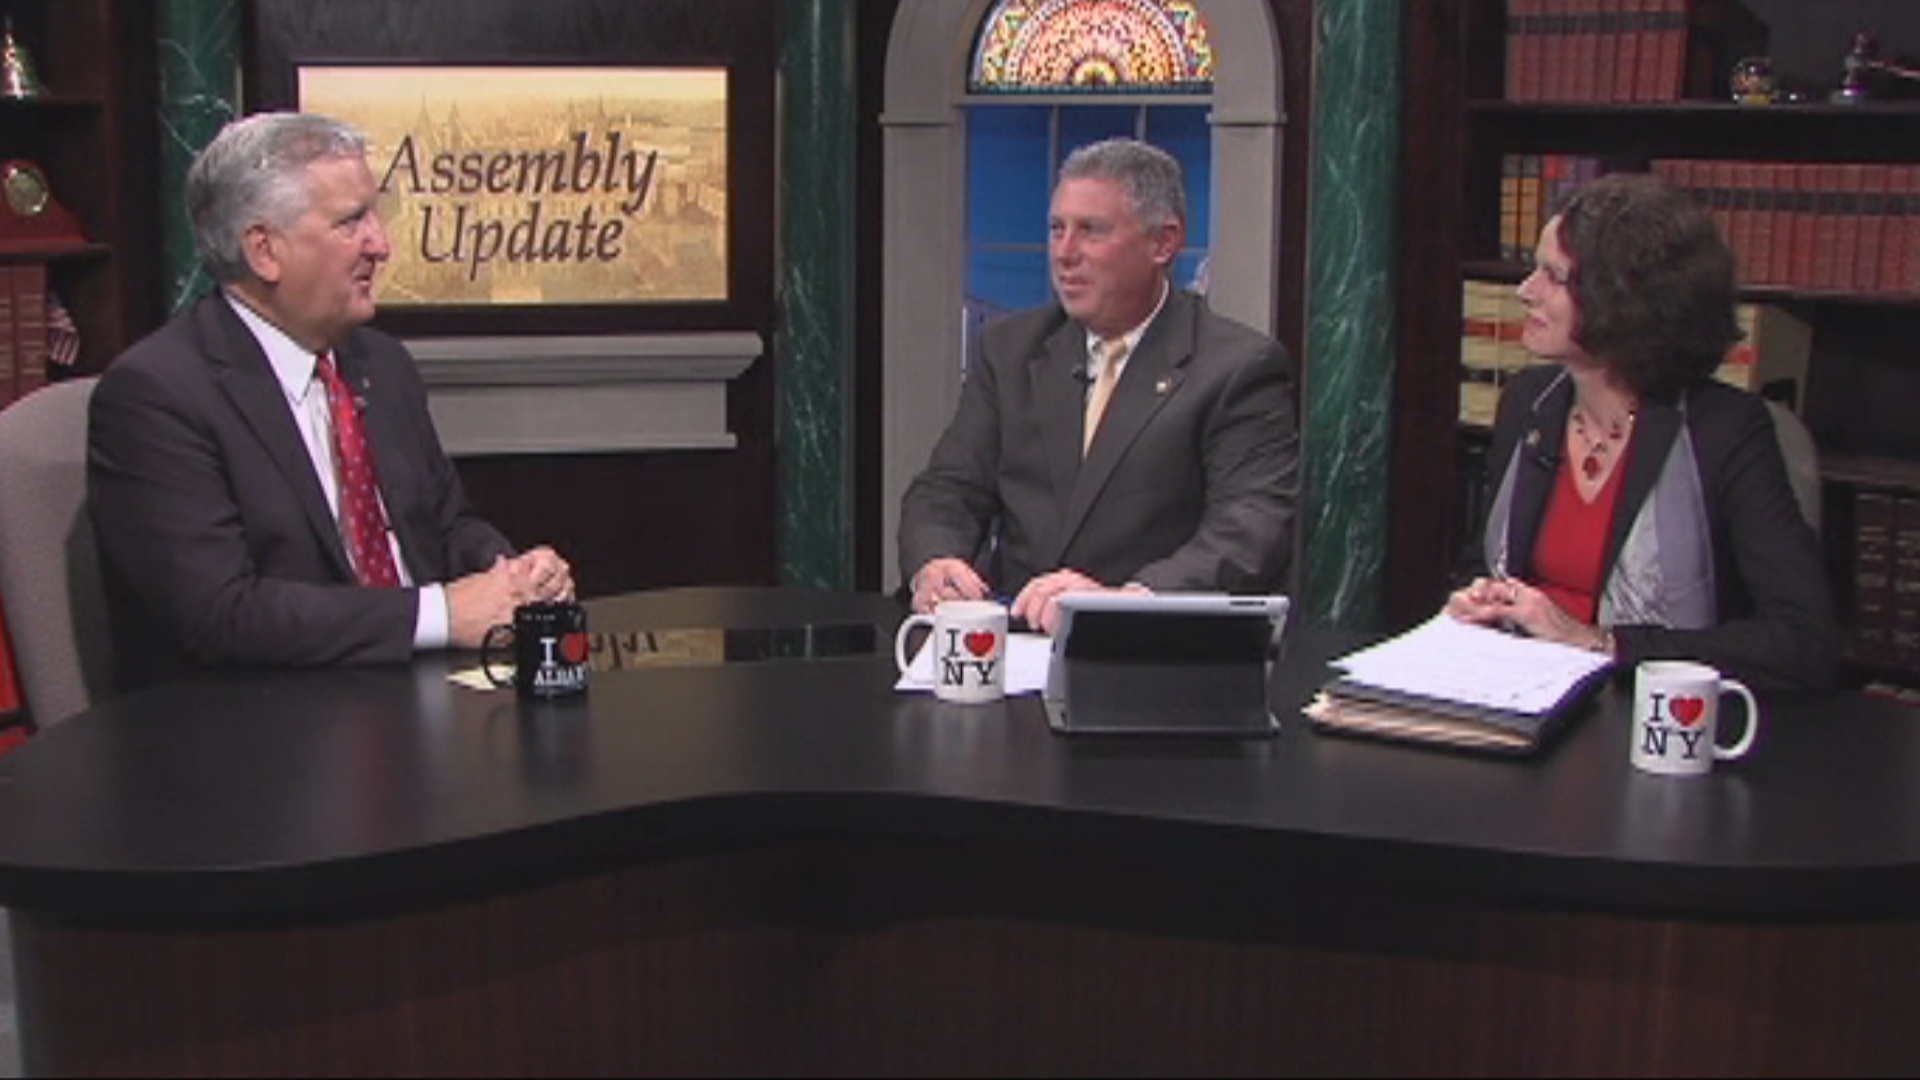 Interview with Mayor Jennings on Education